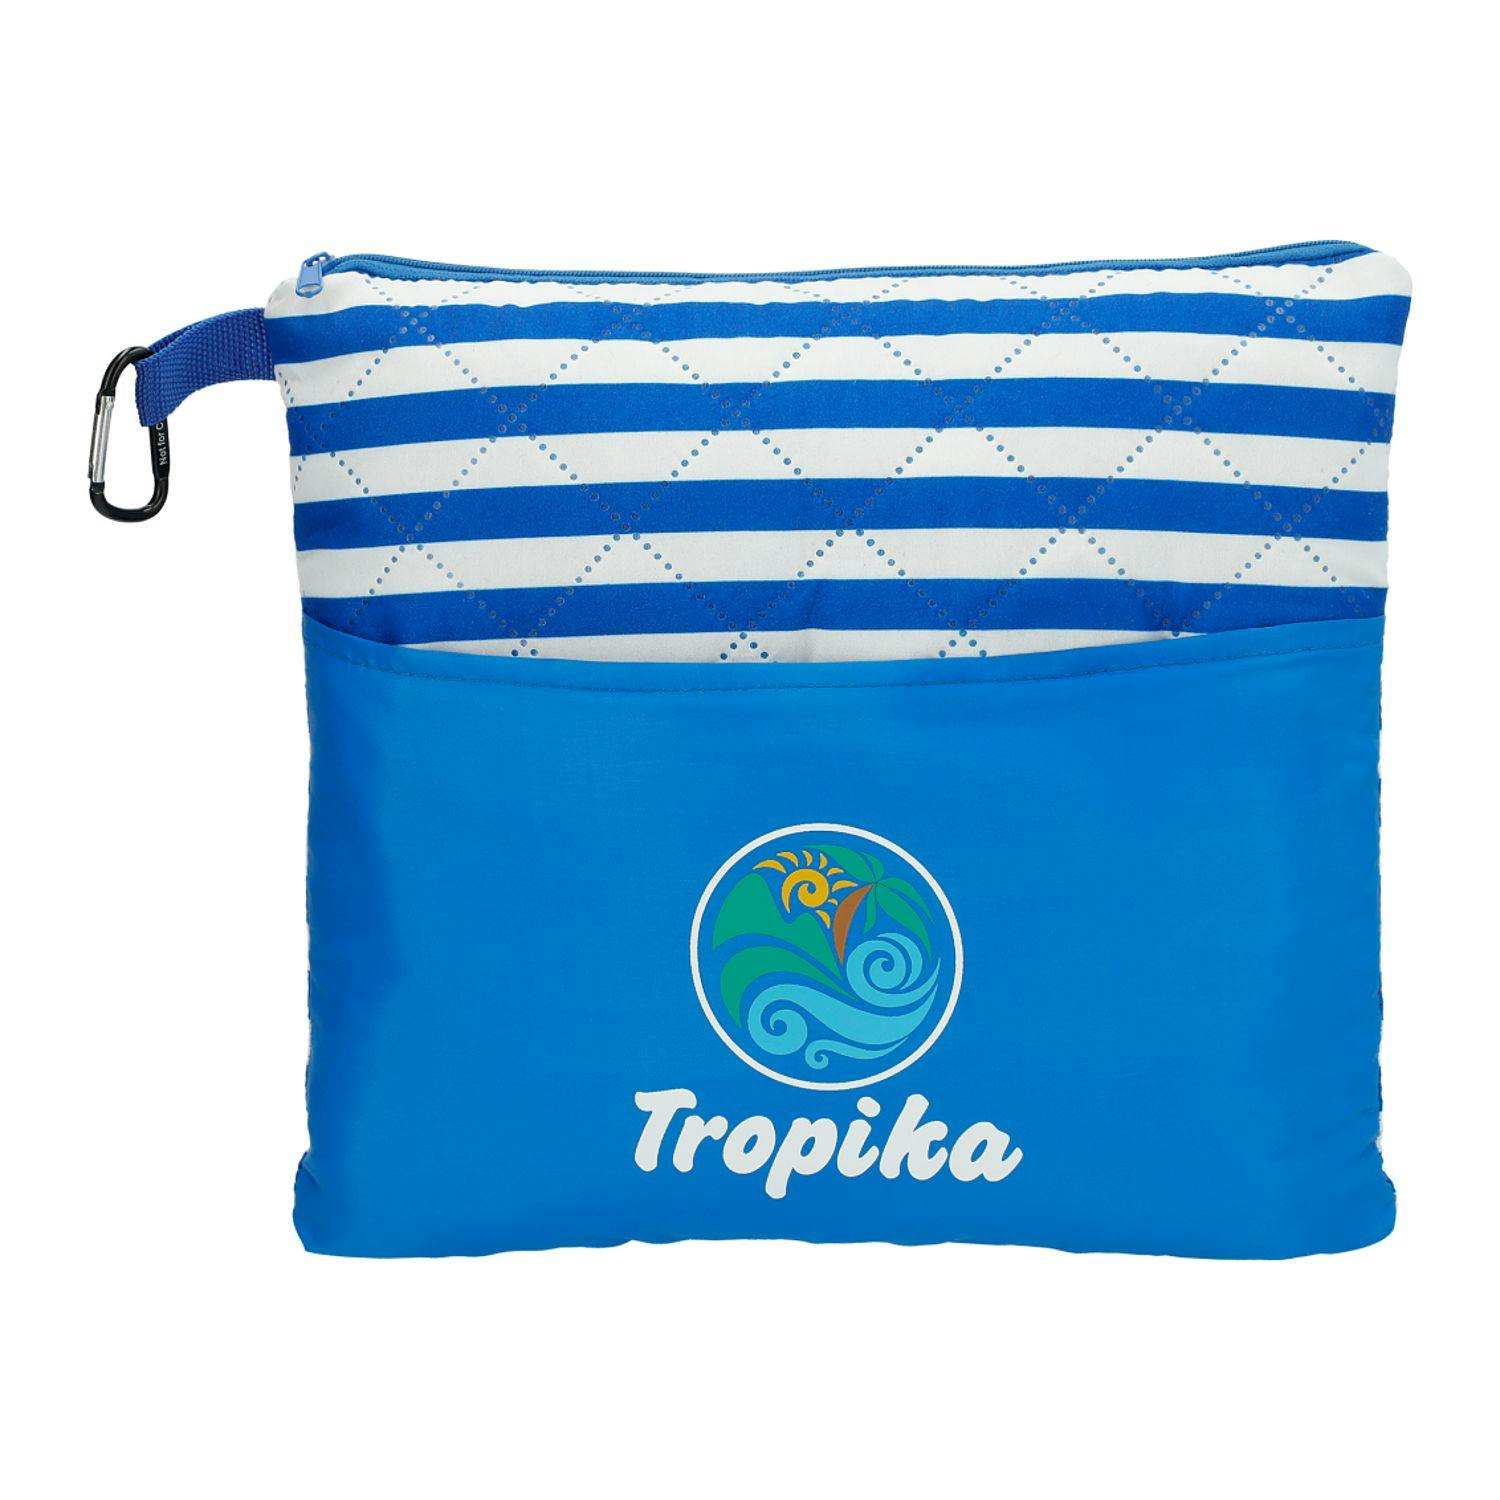 Portable Beach Blanket and Pillow - additional Image 1